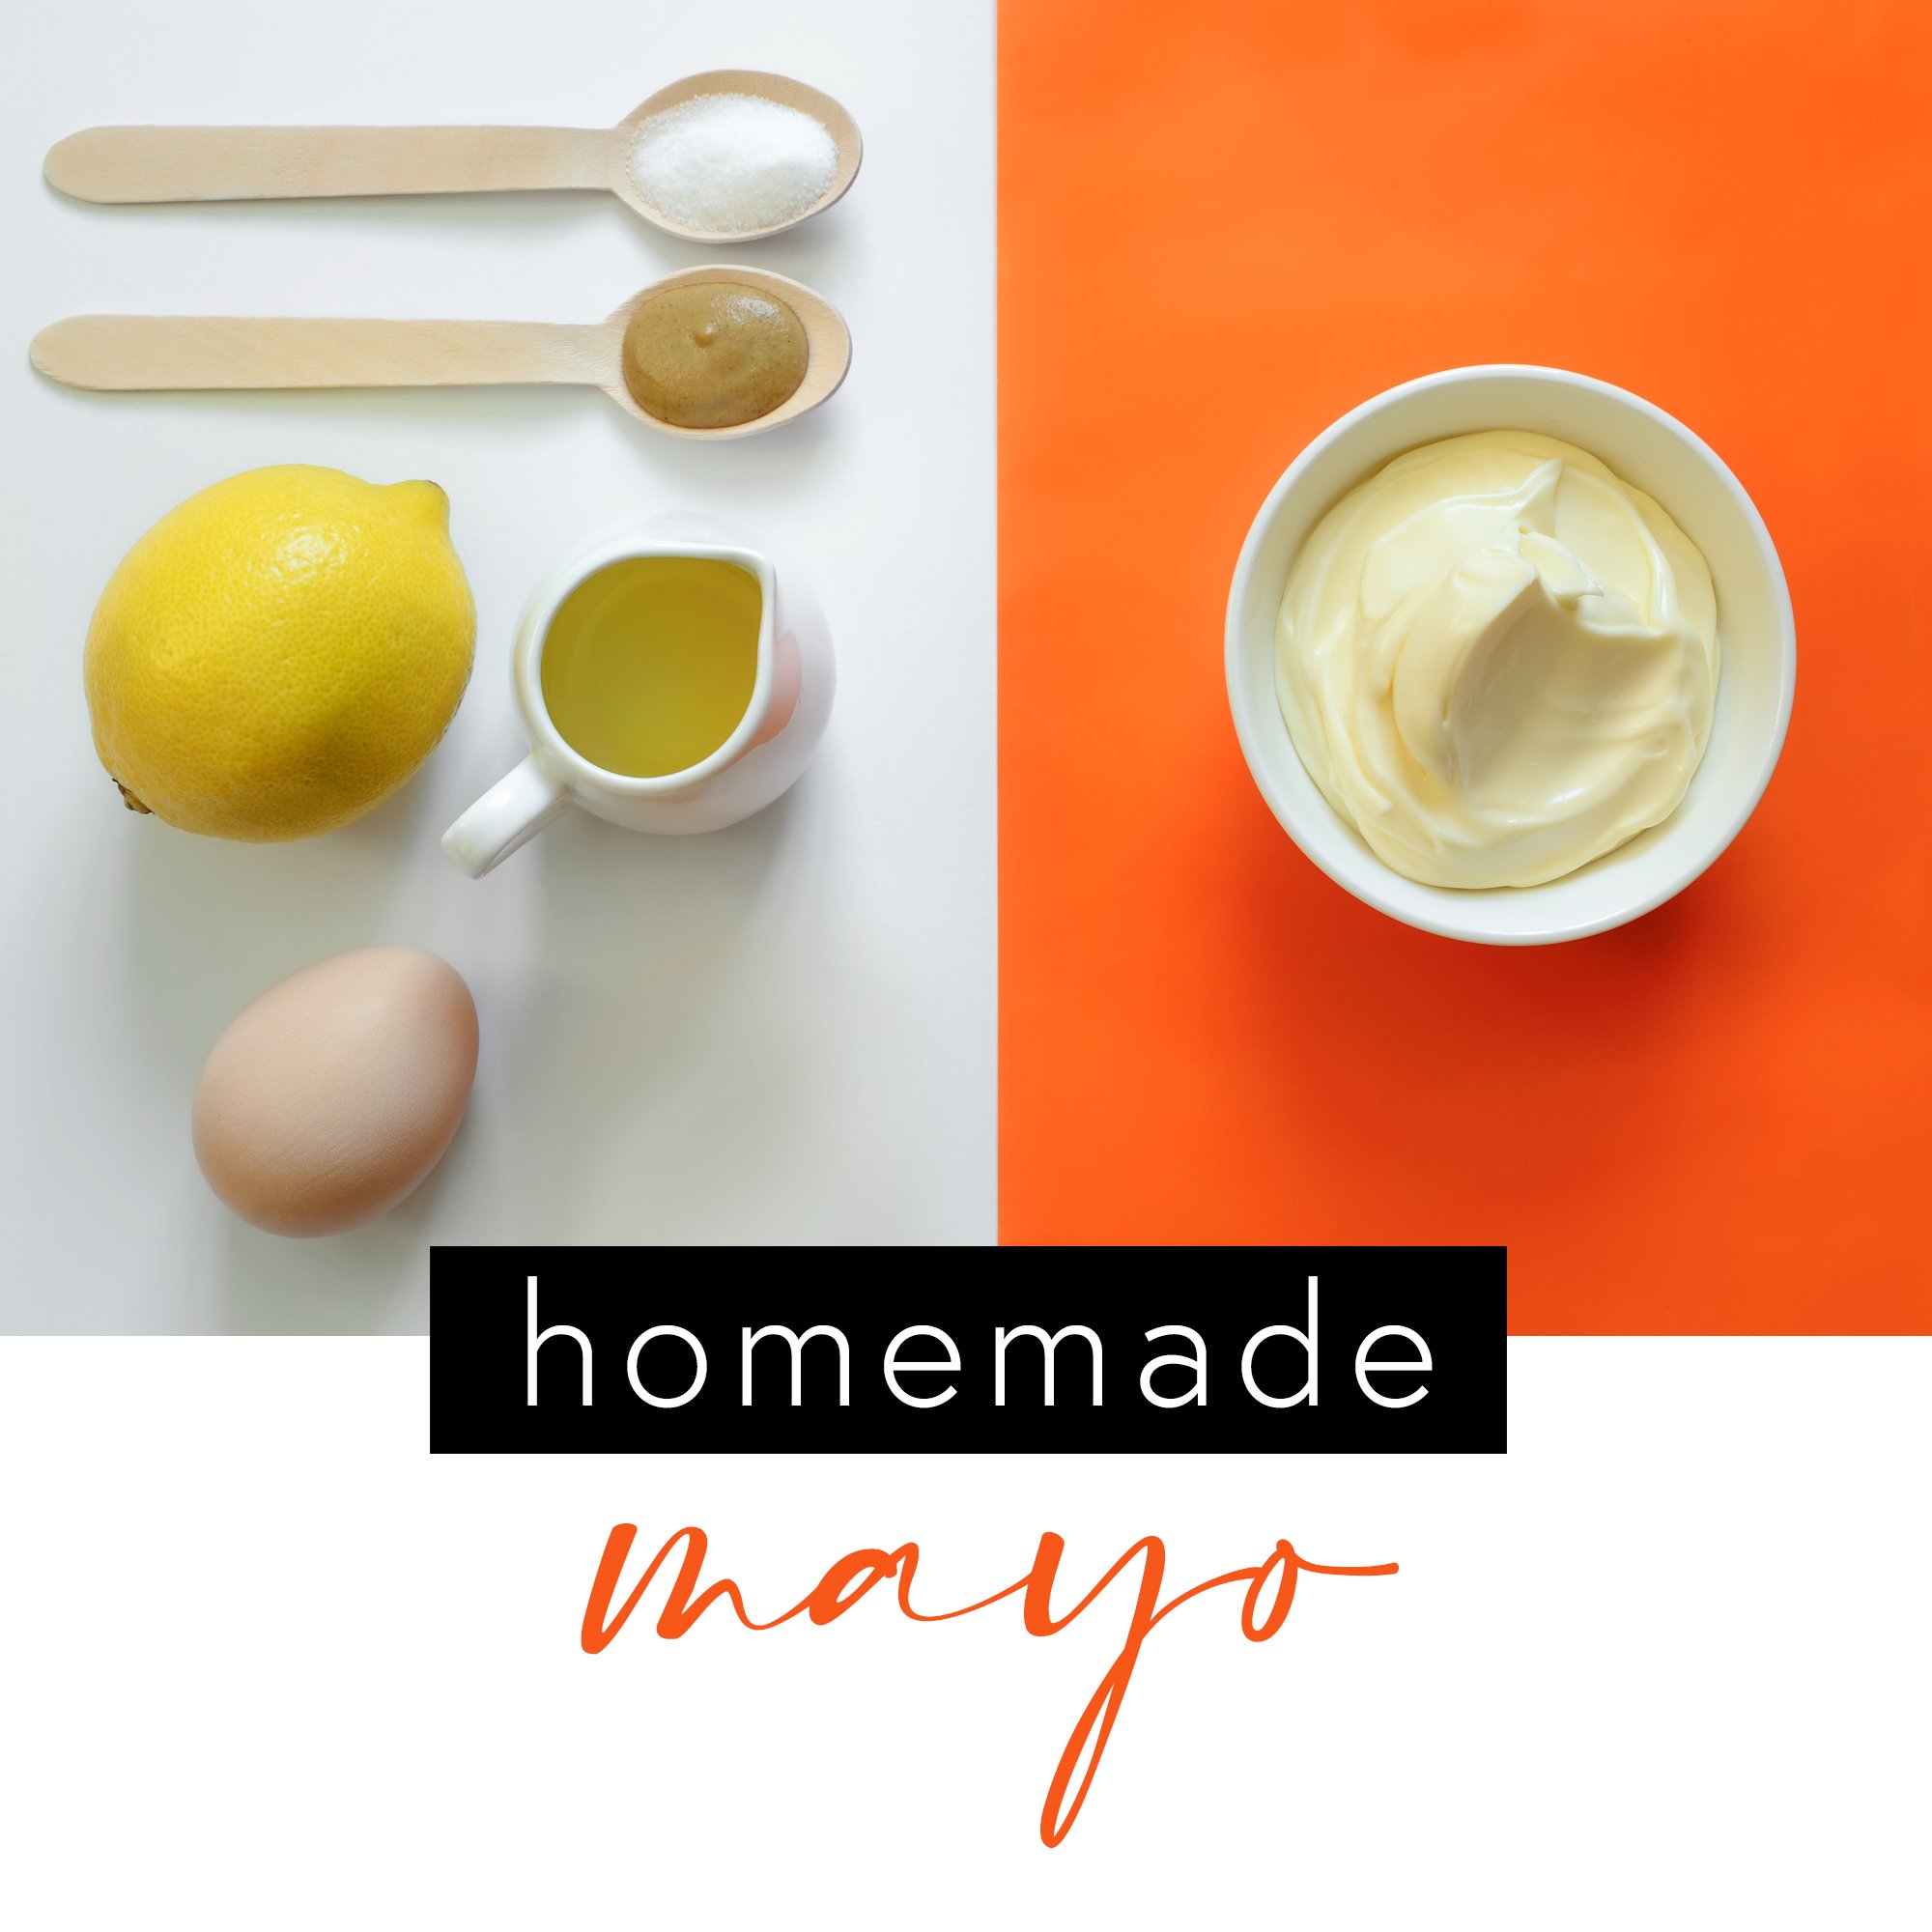 We love sharing recipes for easy swaps! Most store bought mayonnaise is full of commercial oils like soybean oil and canola oil which are known for causing inflammation. Healthier alternatives are made with avocado oil or coconut oil. Primal Kitchen 